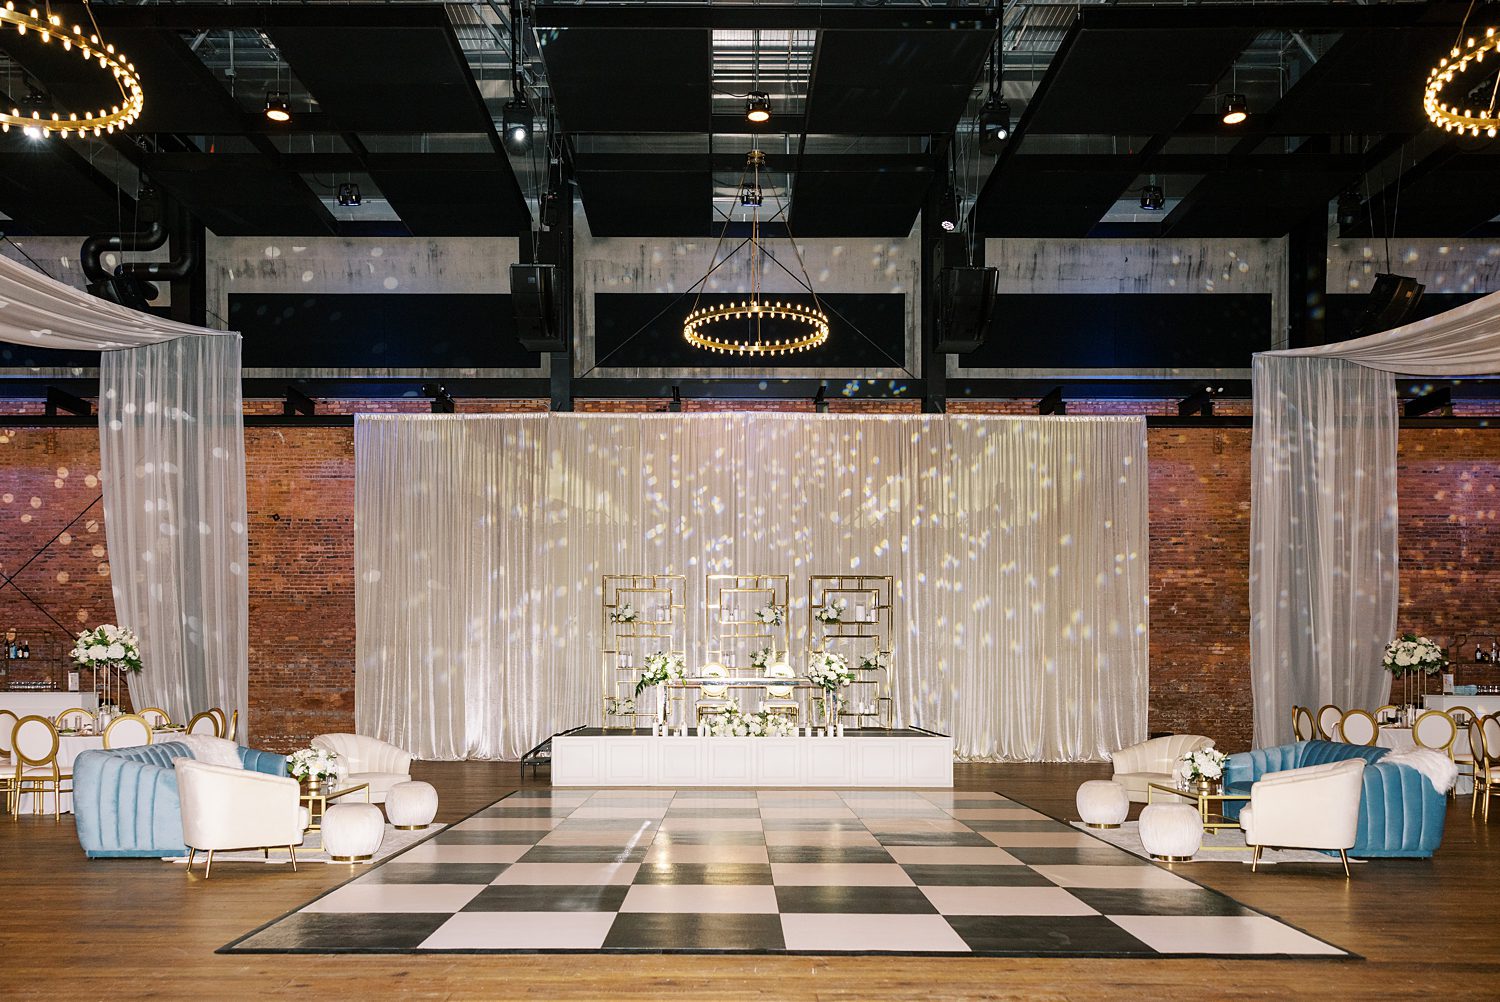 dance floor and seating area for traditional wedding reception at Armature Works